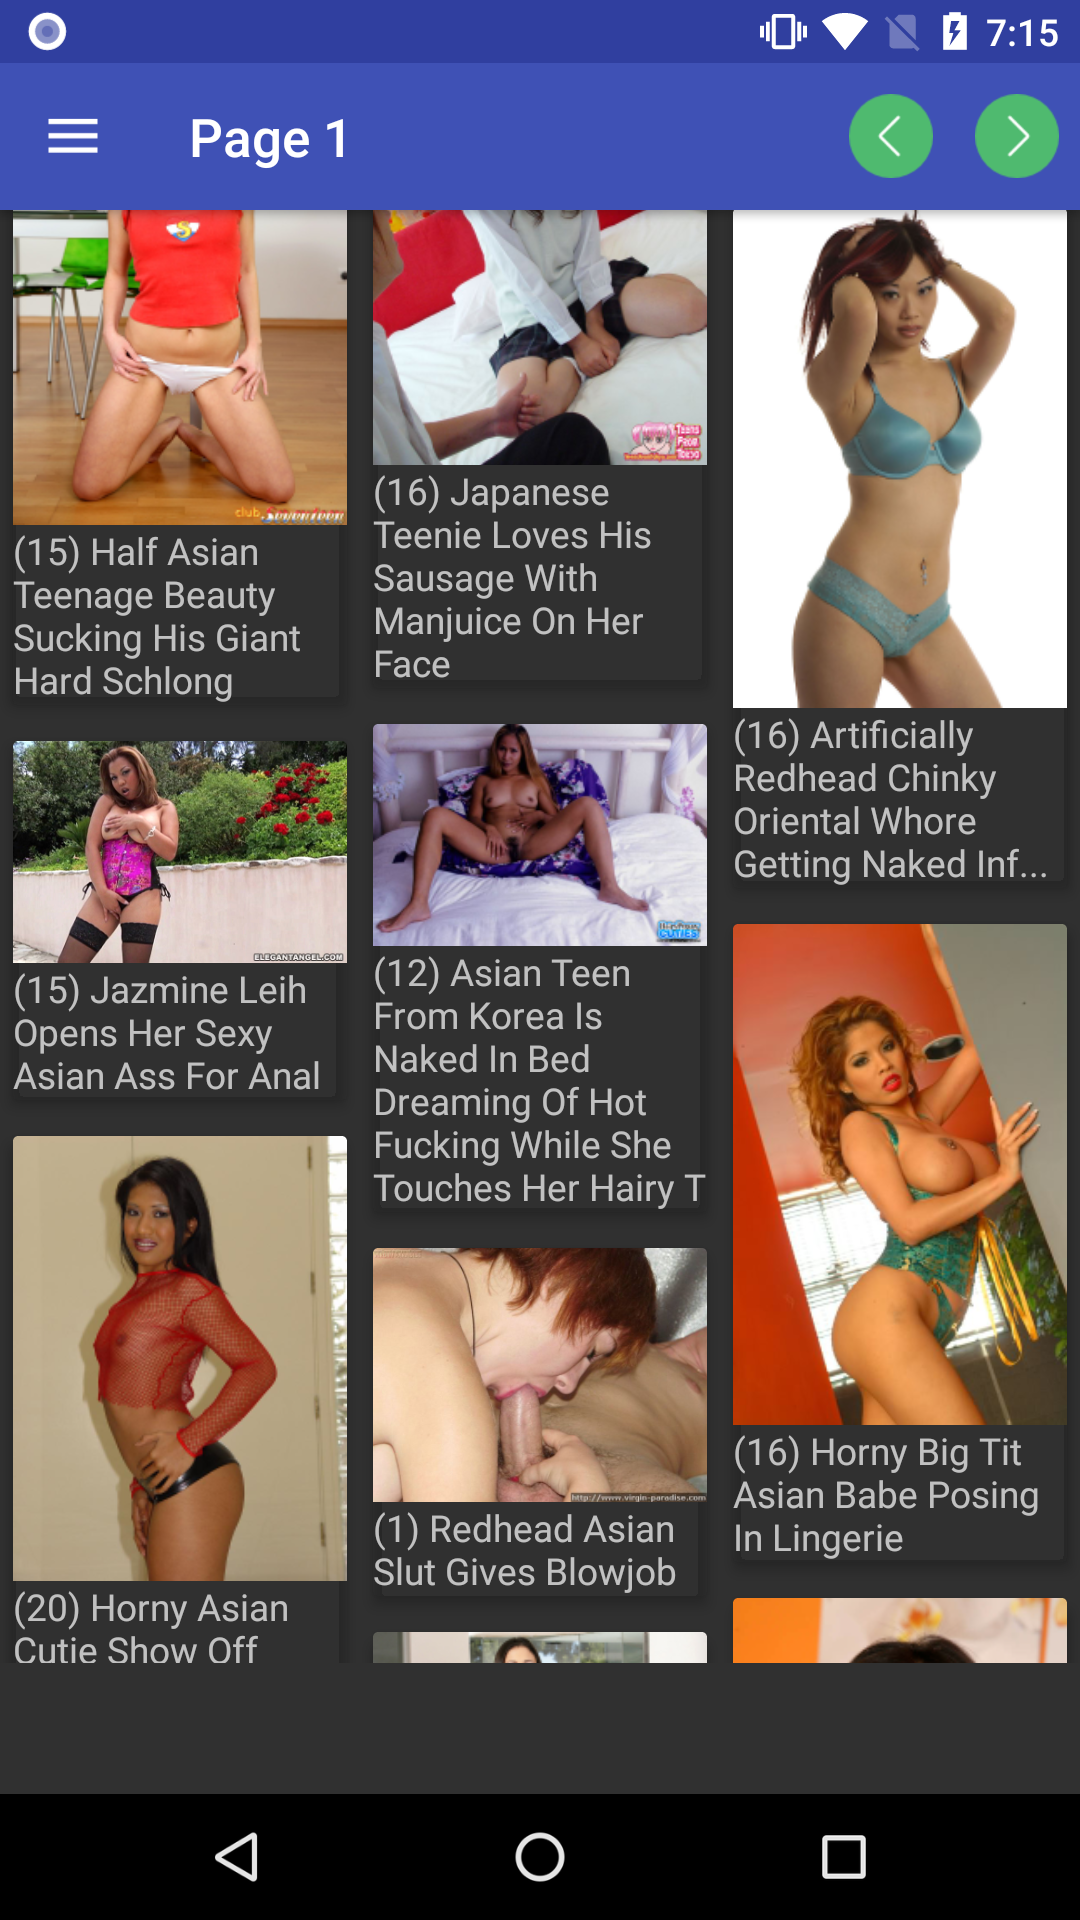 Asian Galleries 2 best,lair,henti,download,amateurs,sexy,galleries,photo,offline,android,mythras,sex,pics,hot,editor,updates,anime,apk,pornstars,asian,hentai,porn,pictures,gallery,japan,puzzle,app